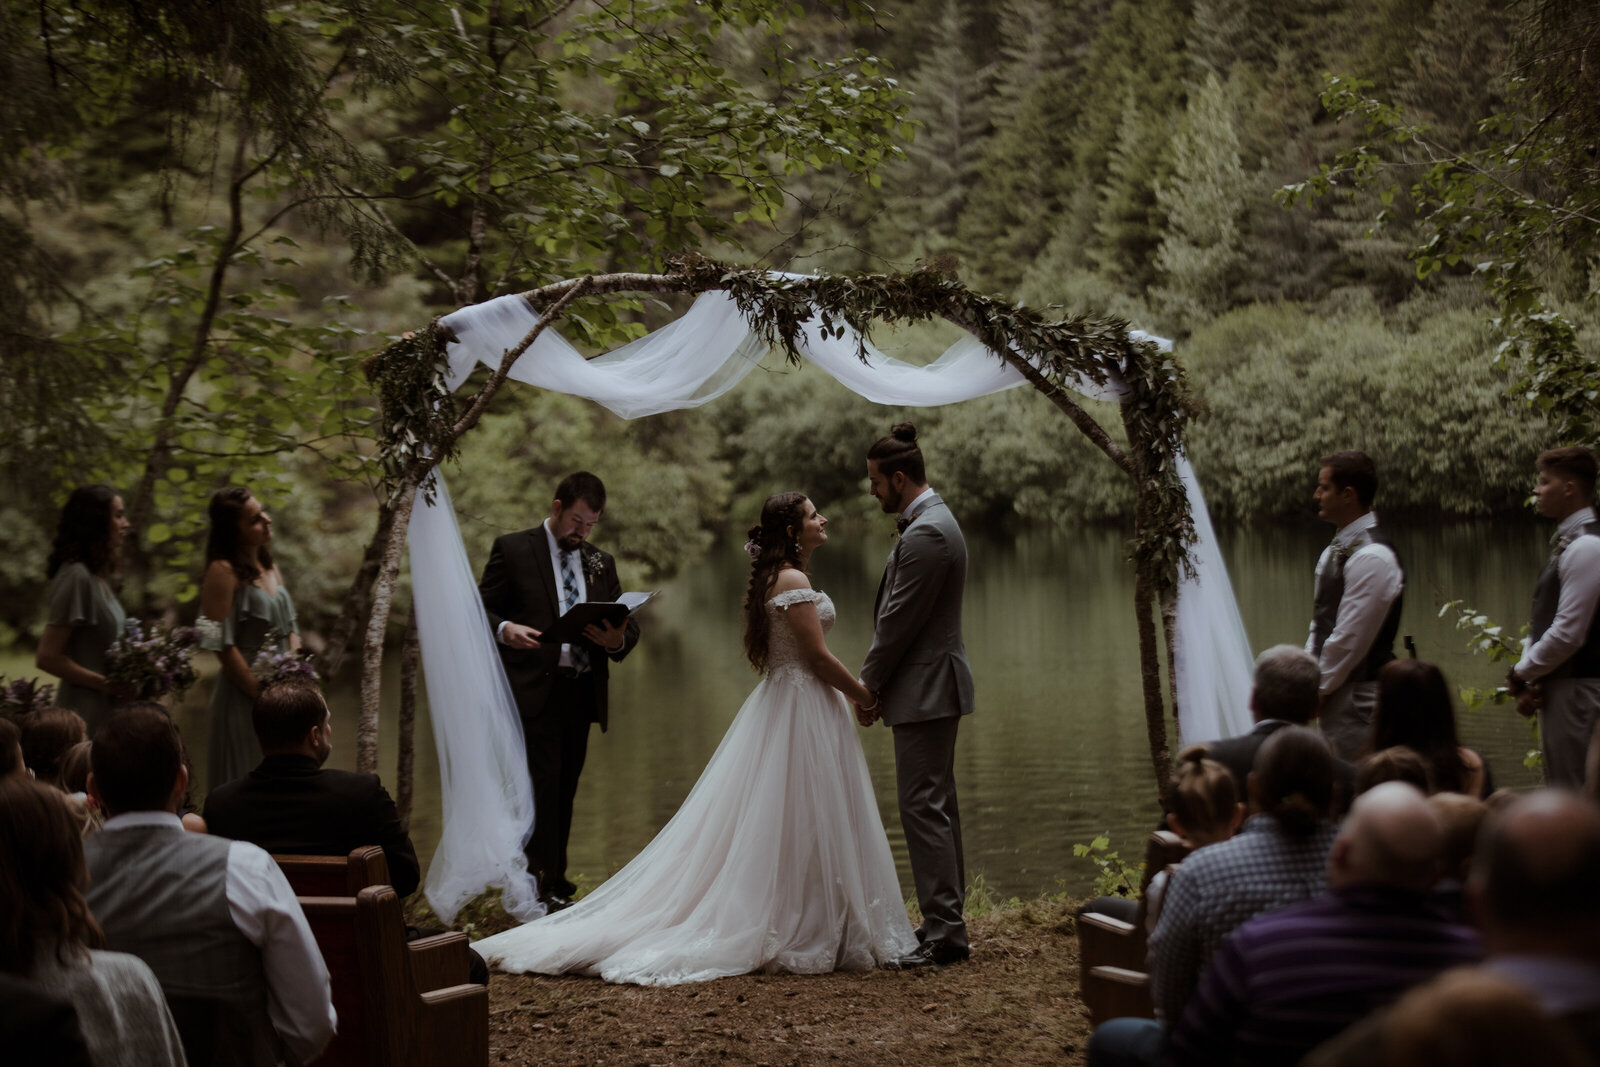 Bride and groom getting married in the forrest